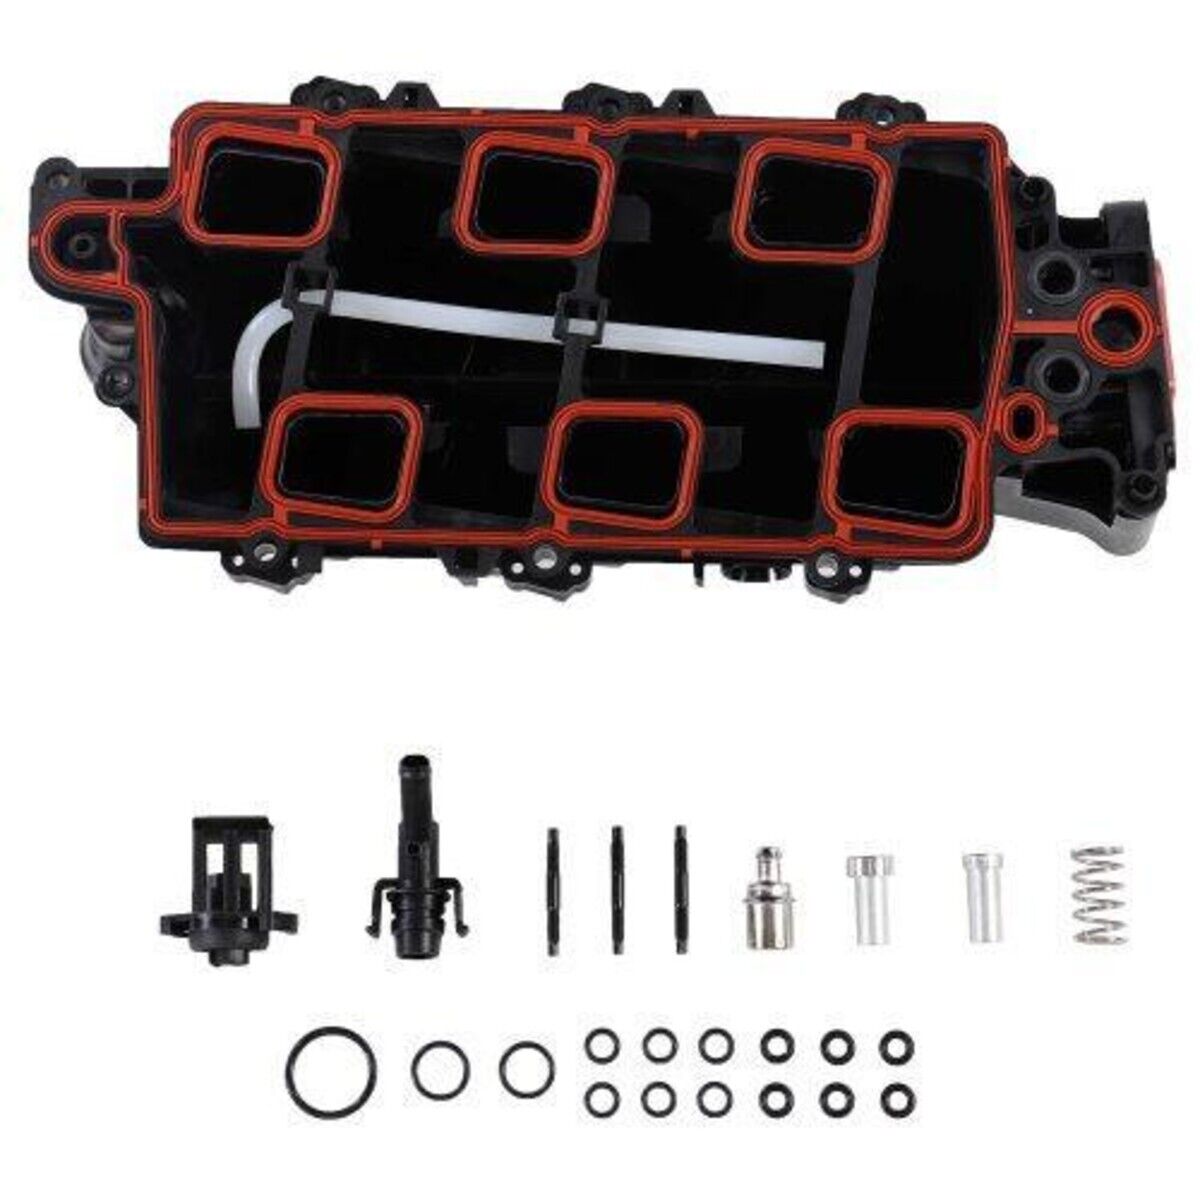 IMA1002 DNJ Kit Intake Manifold Upper for Chevy Olds Le Sabre NINETY EIGHT Buick